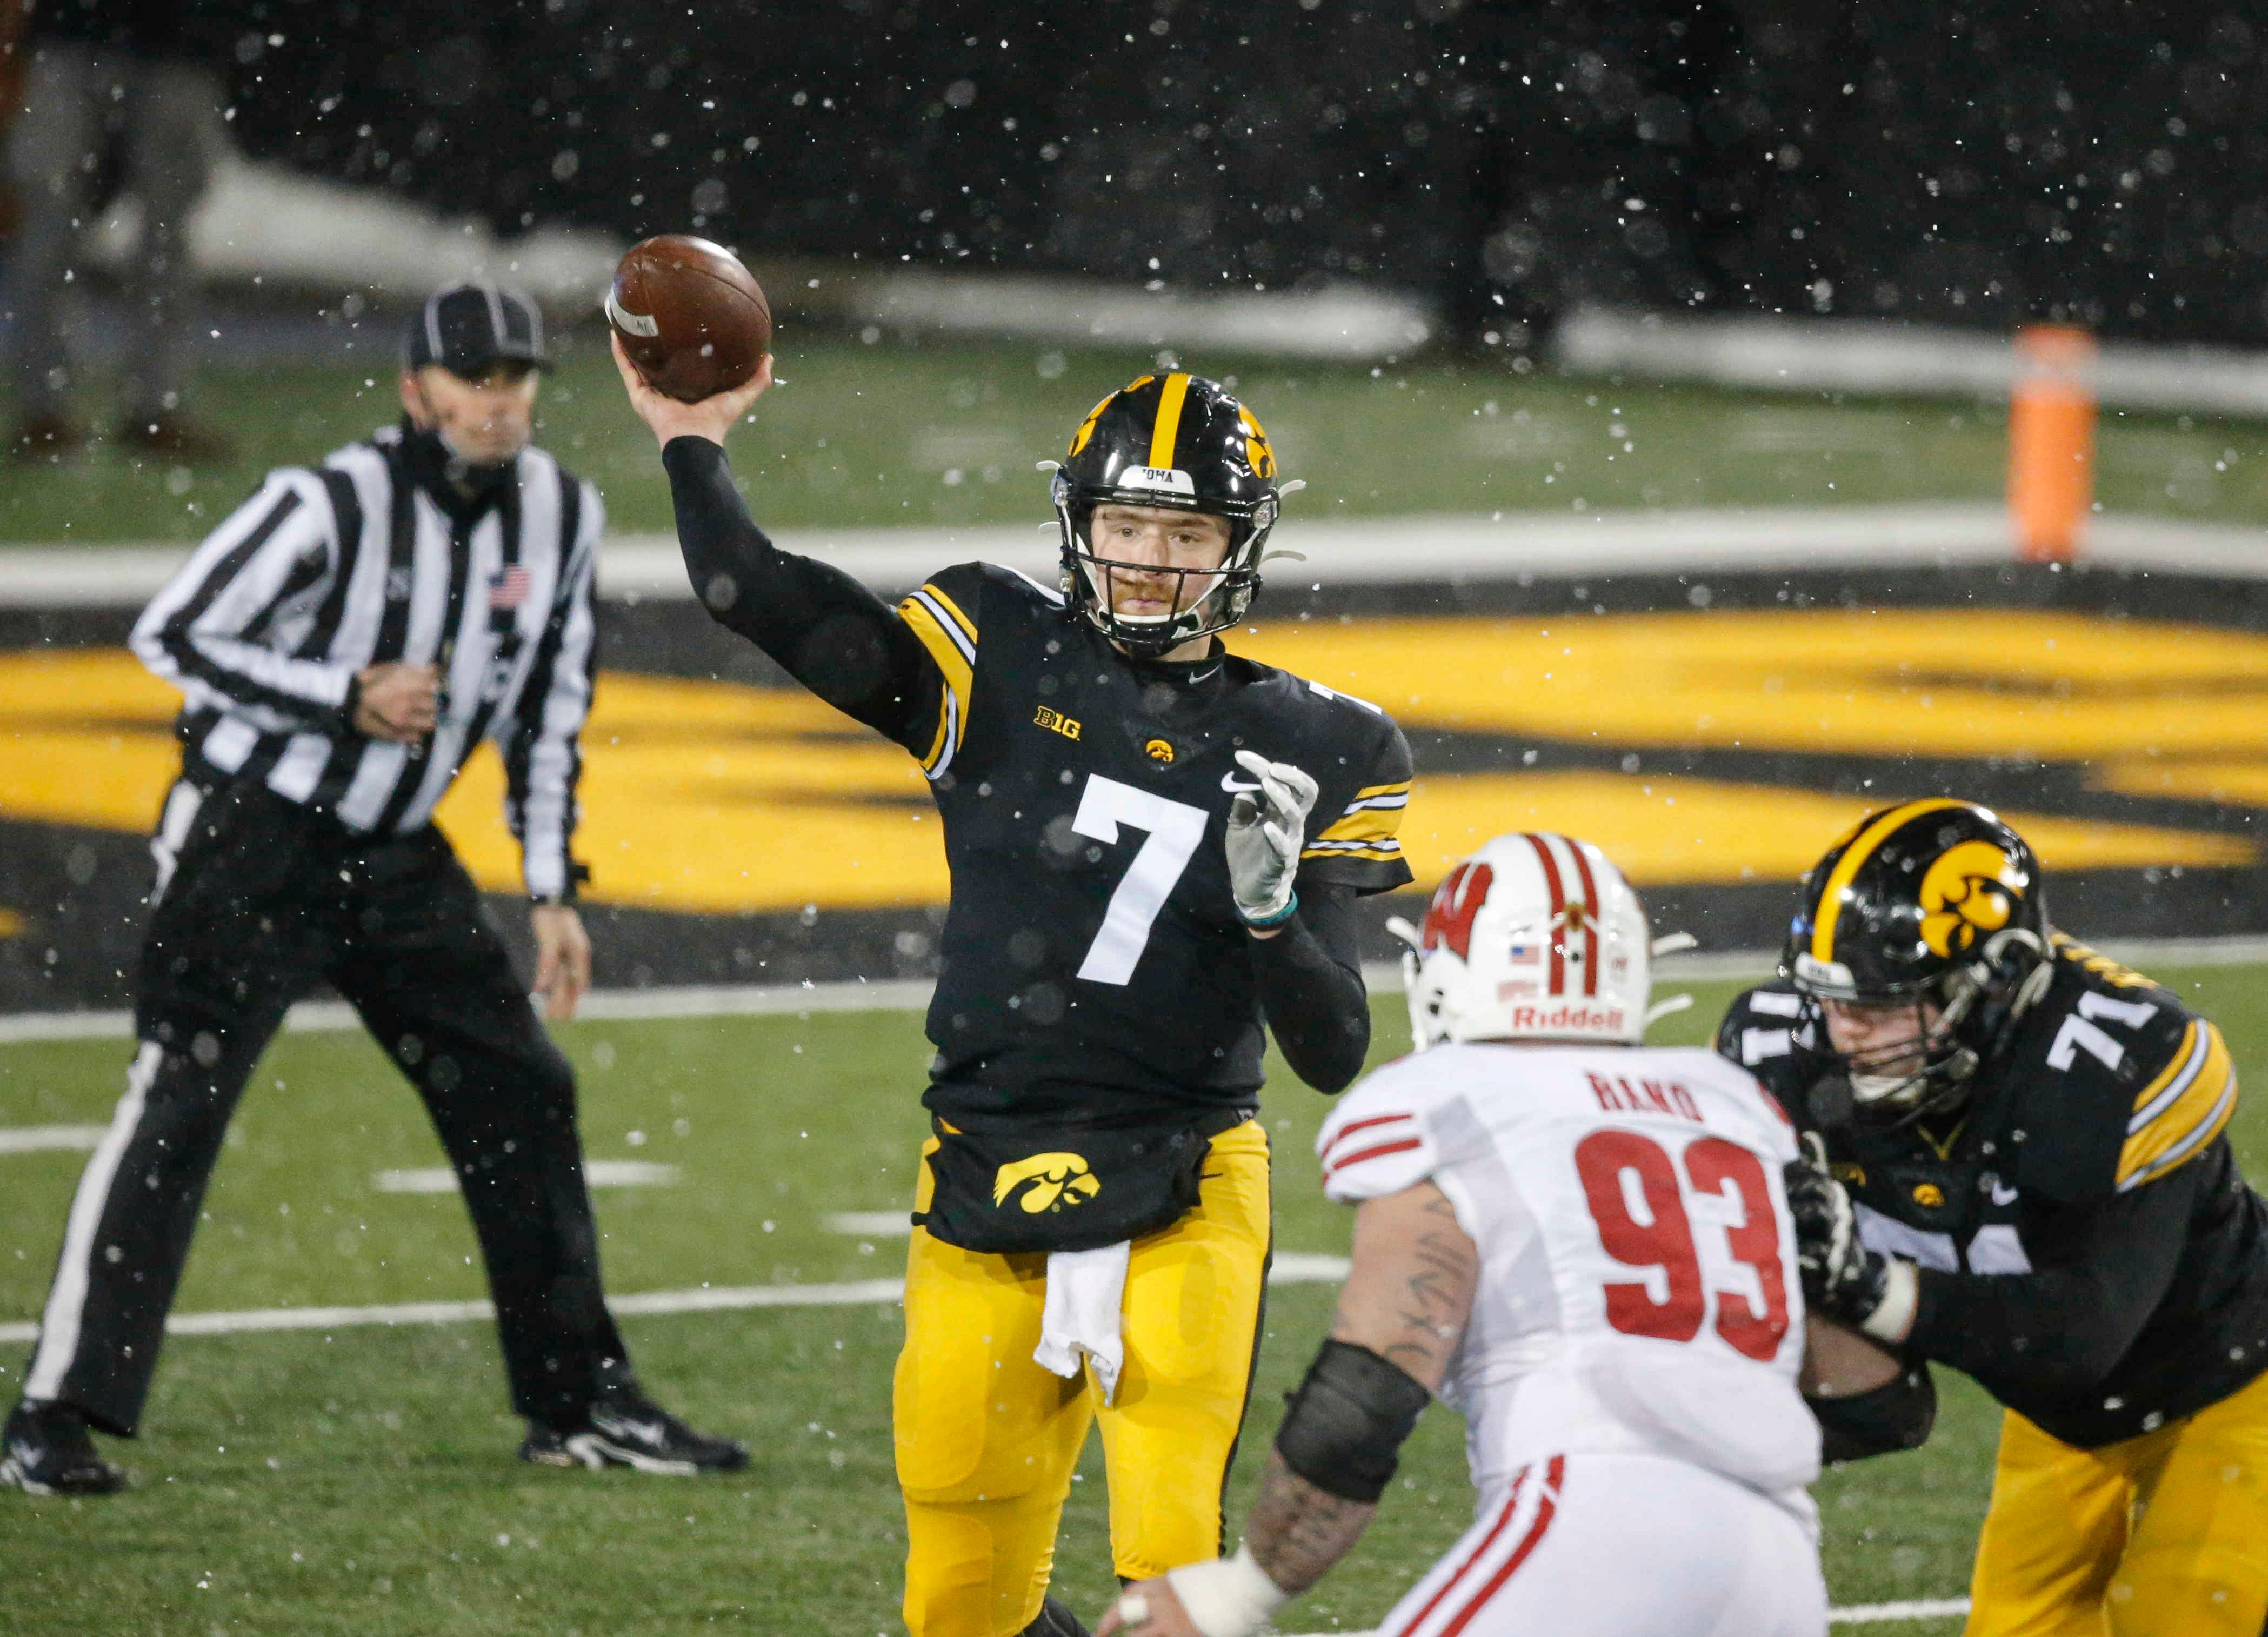 Iowa sophomore quarterback Spencer Petras fires a pass in the fourth quarter against Wisconsin on Saturday, Dec. 12, 2020, at Kinnick Stadium in Iowa City, Iowa.